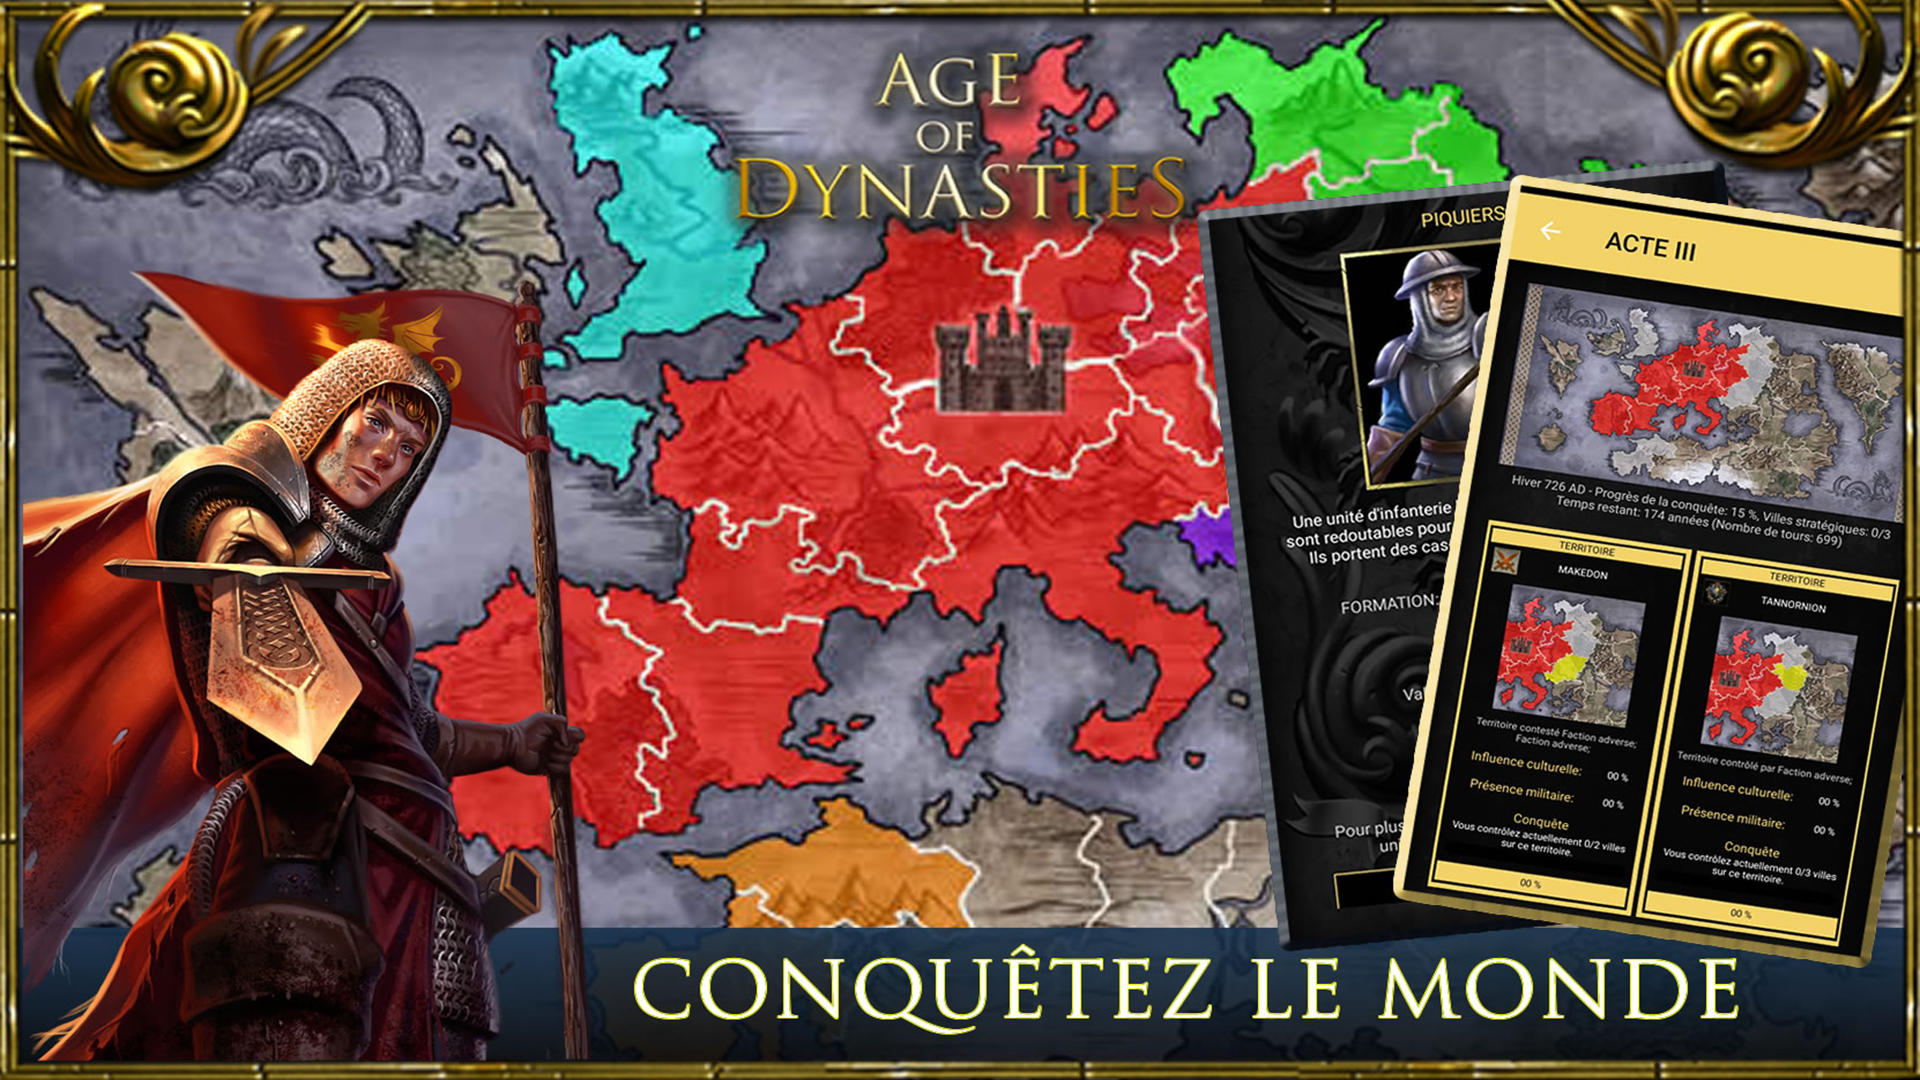 Screenshot 1 of Age of Dynasties: jeux de roi 4.1.2.0